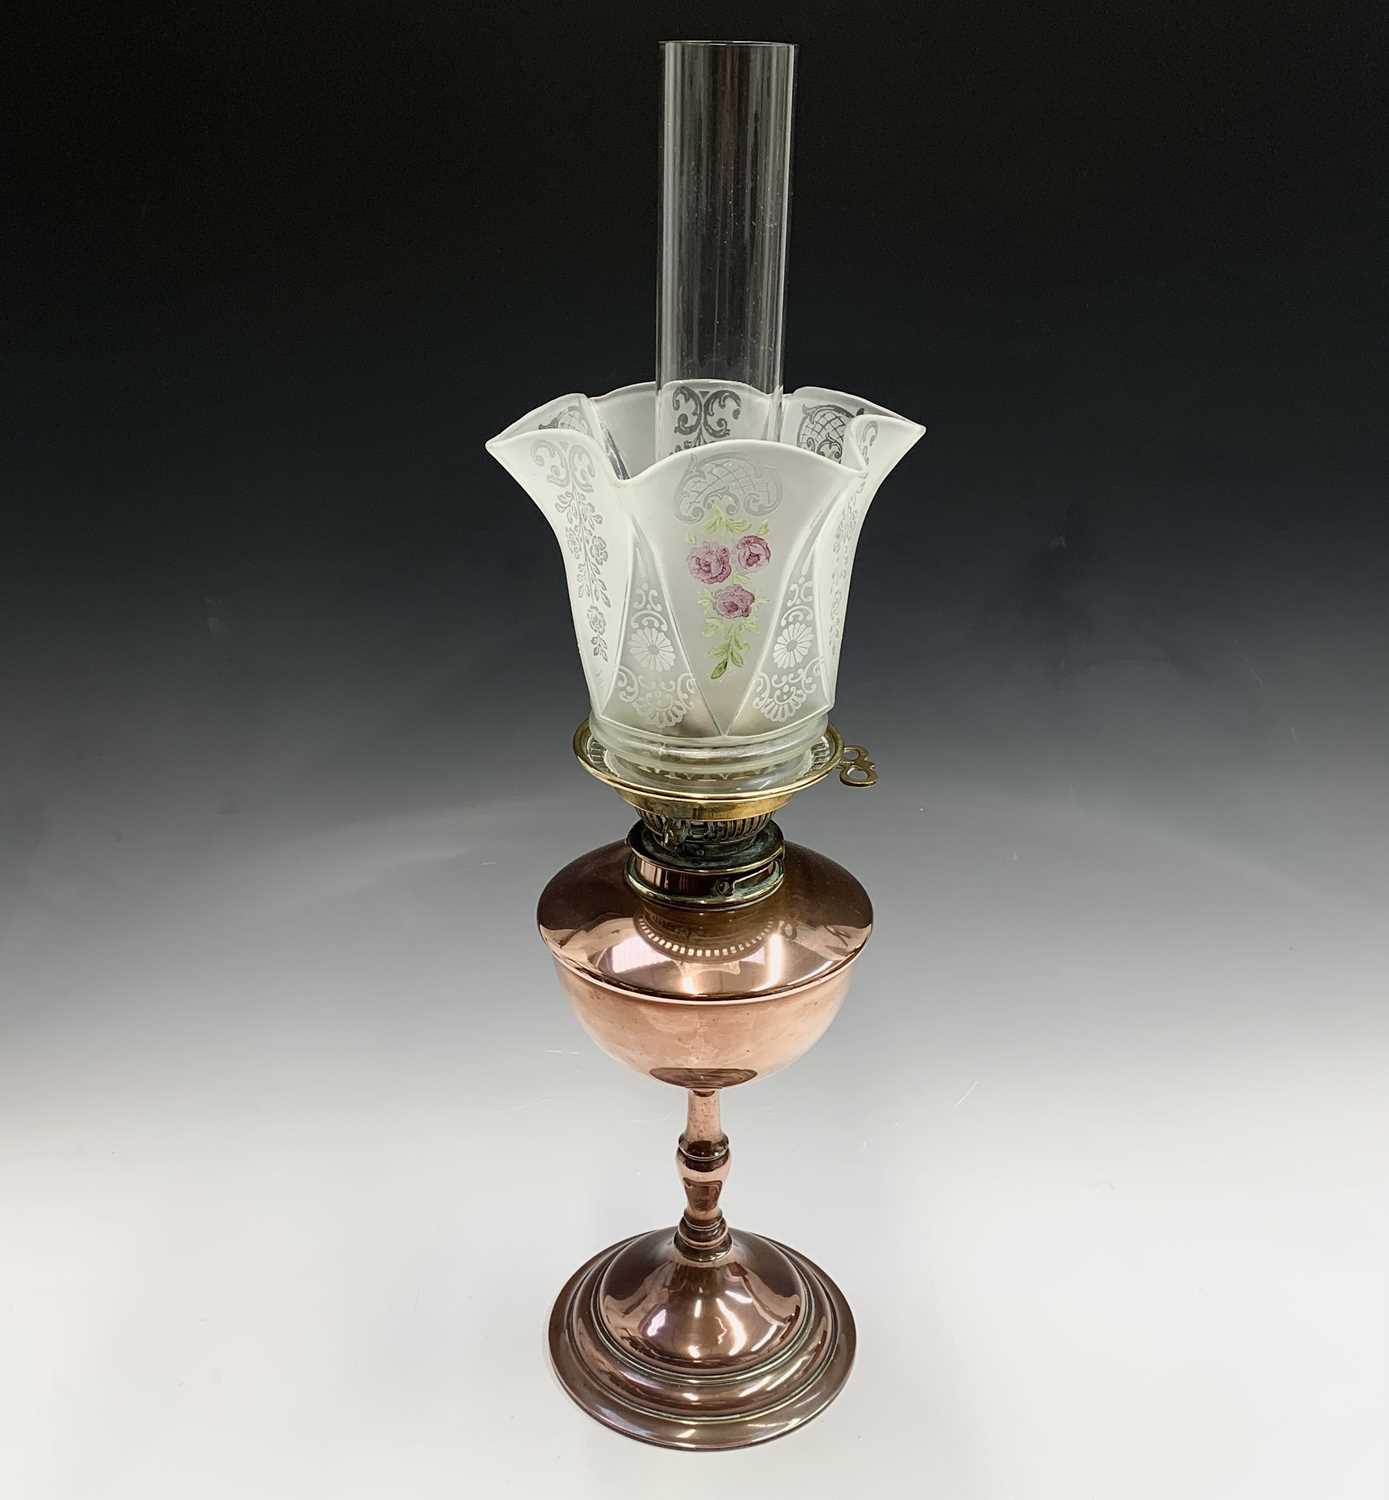 A Messengers Patent copper oil lamp, together with glass shade having acid-etched and painted floral